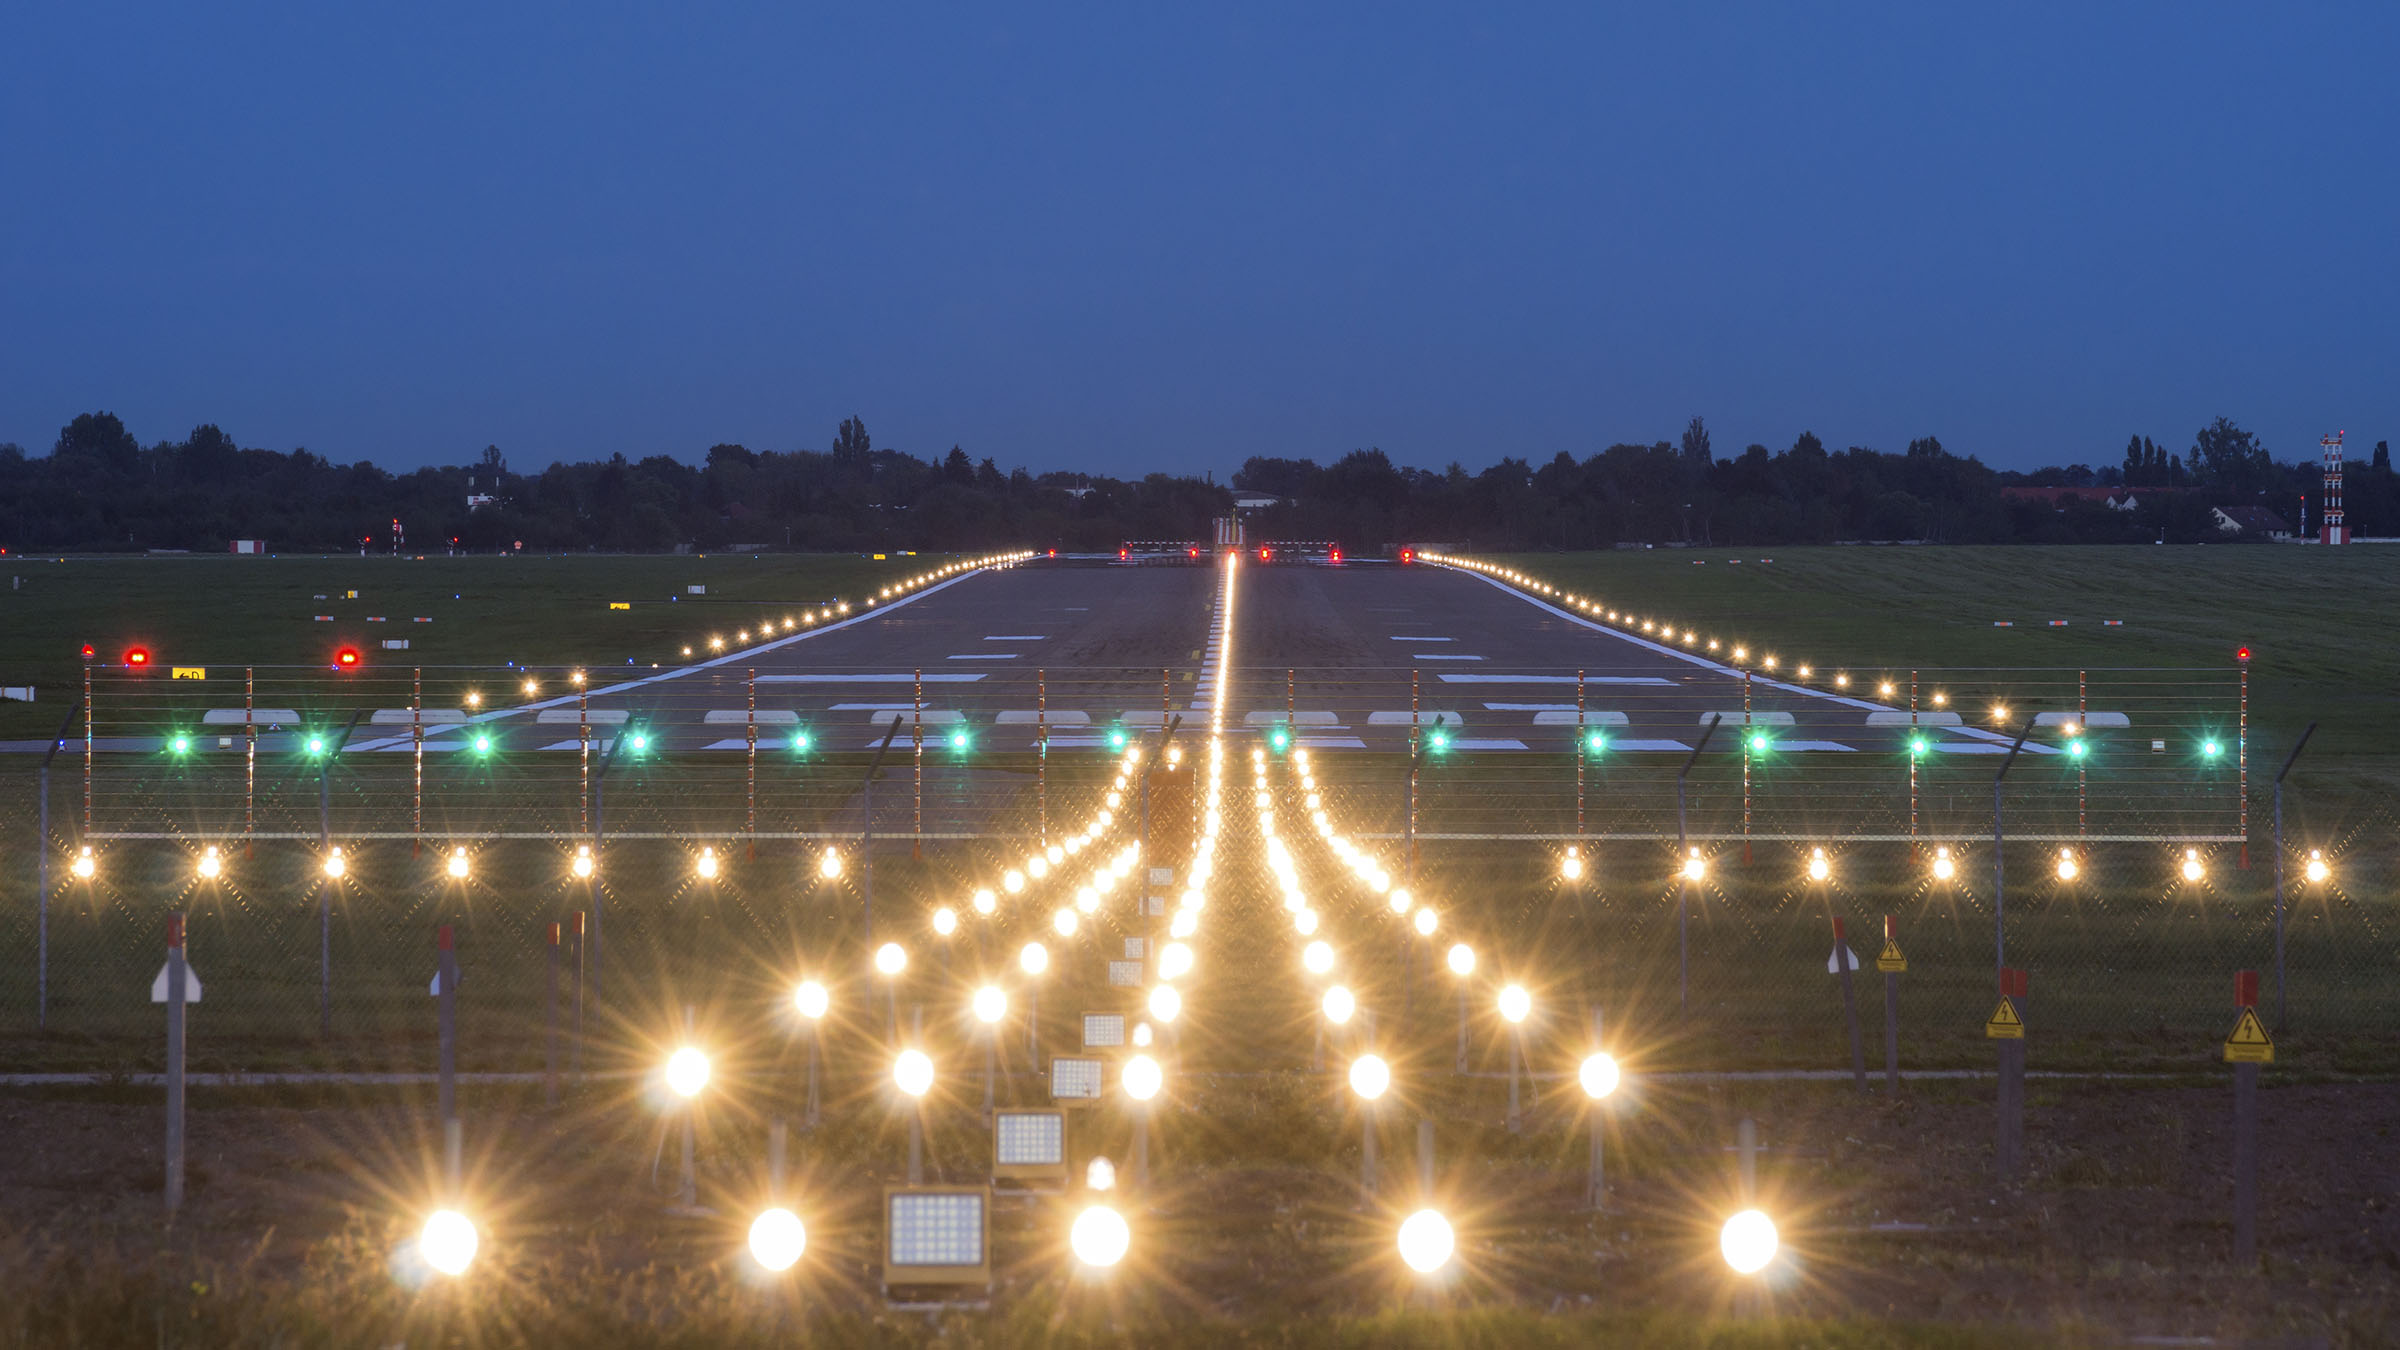 Airport runway lights: What are they all for?